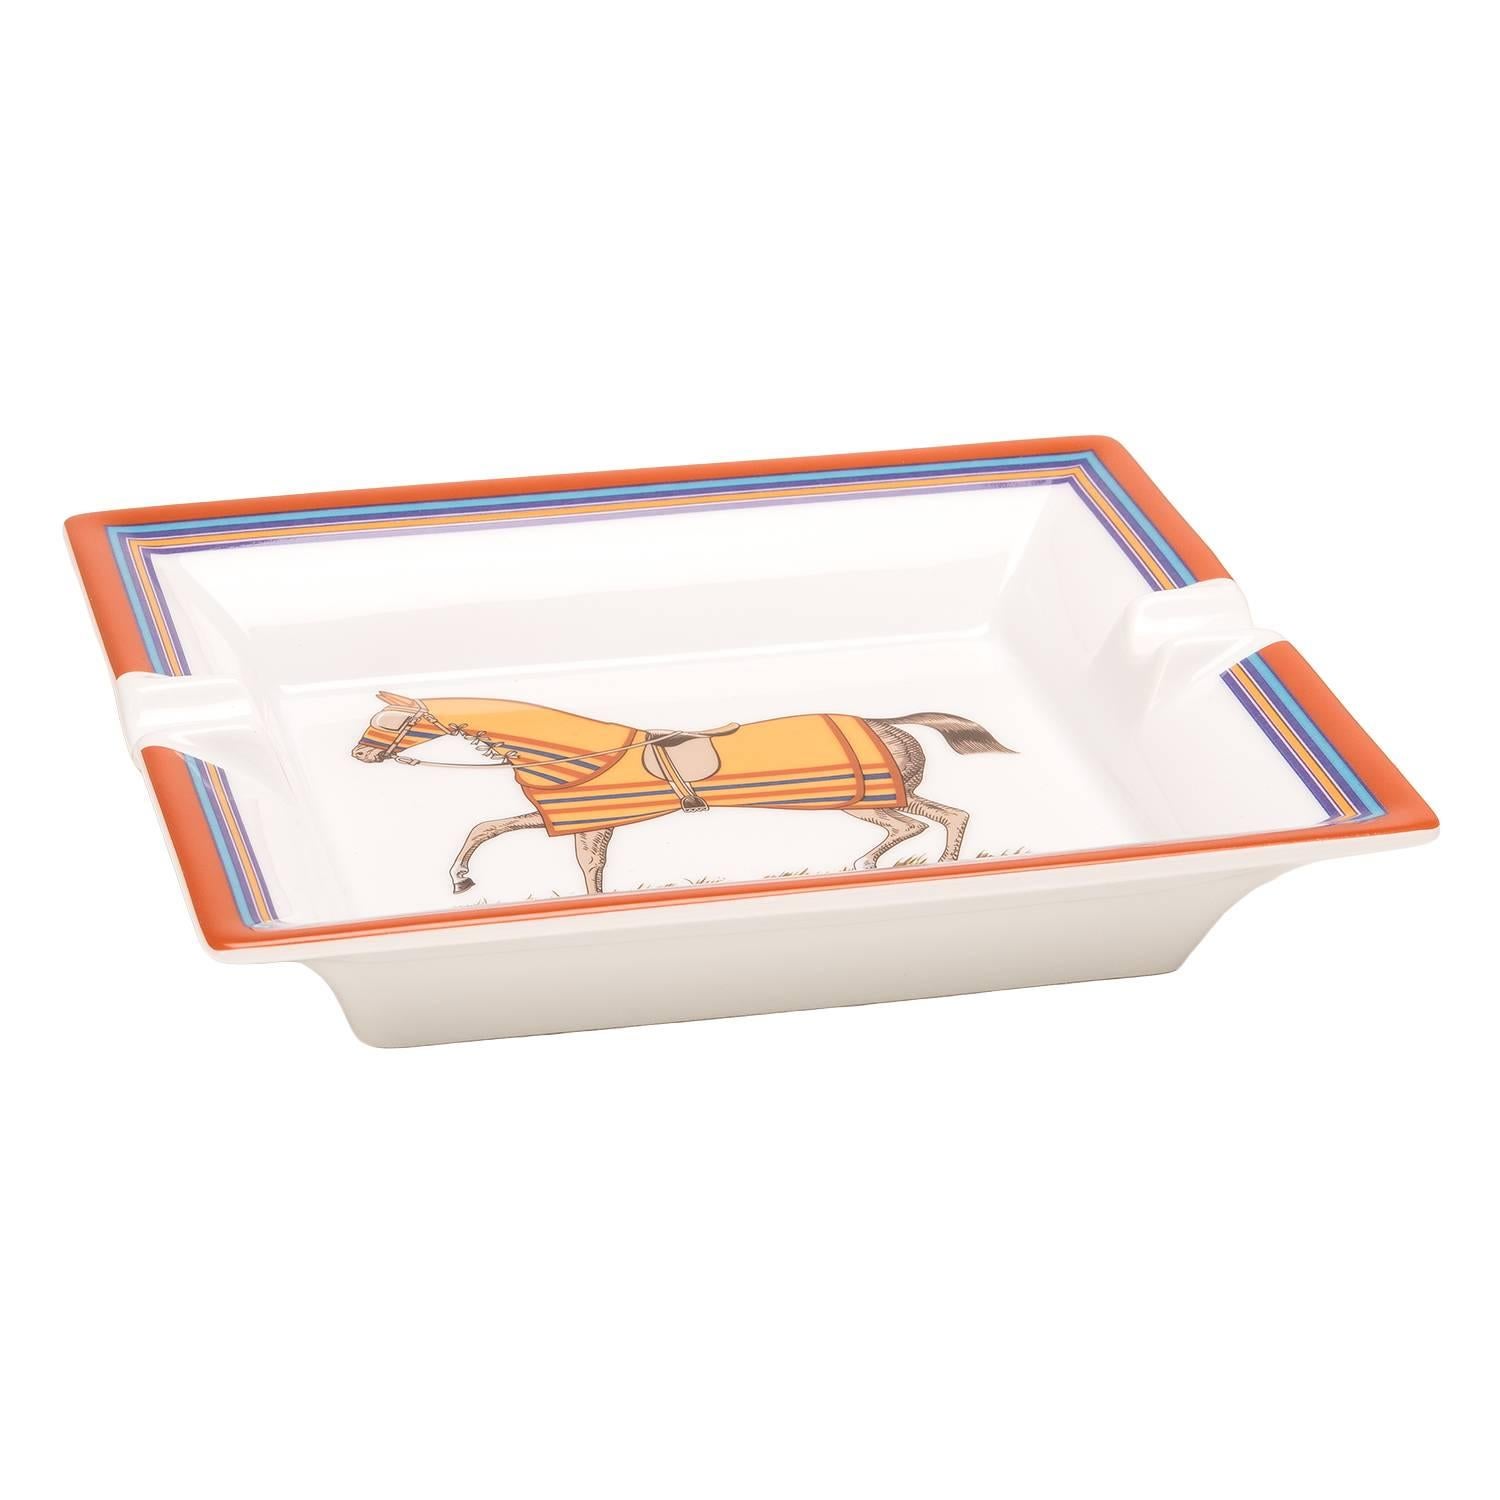 Hermes Chevaux à La Couverture 2 Ashtray of porcelain in sun yellow.

This ashtray features printed Limoges porcelain with a velvet goatskin base.

The Ashtray is 8